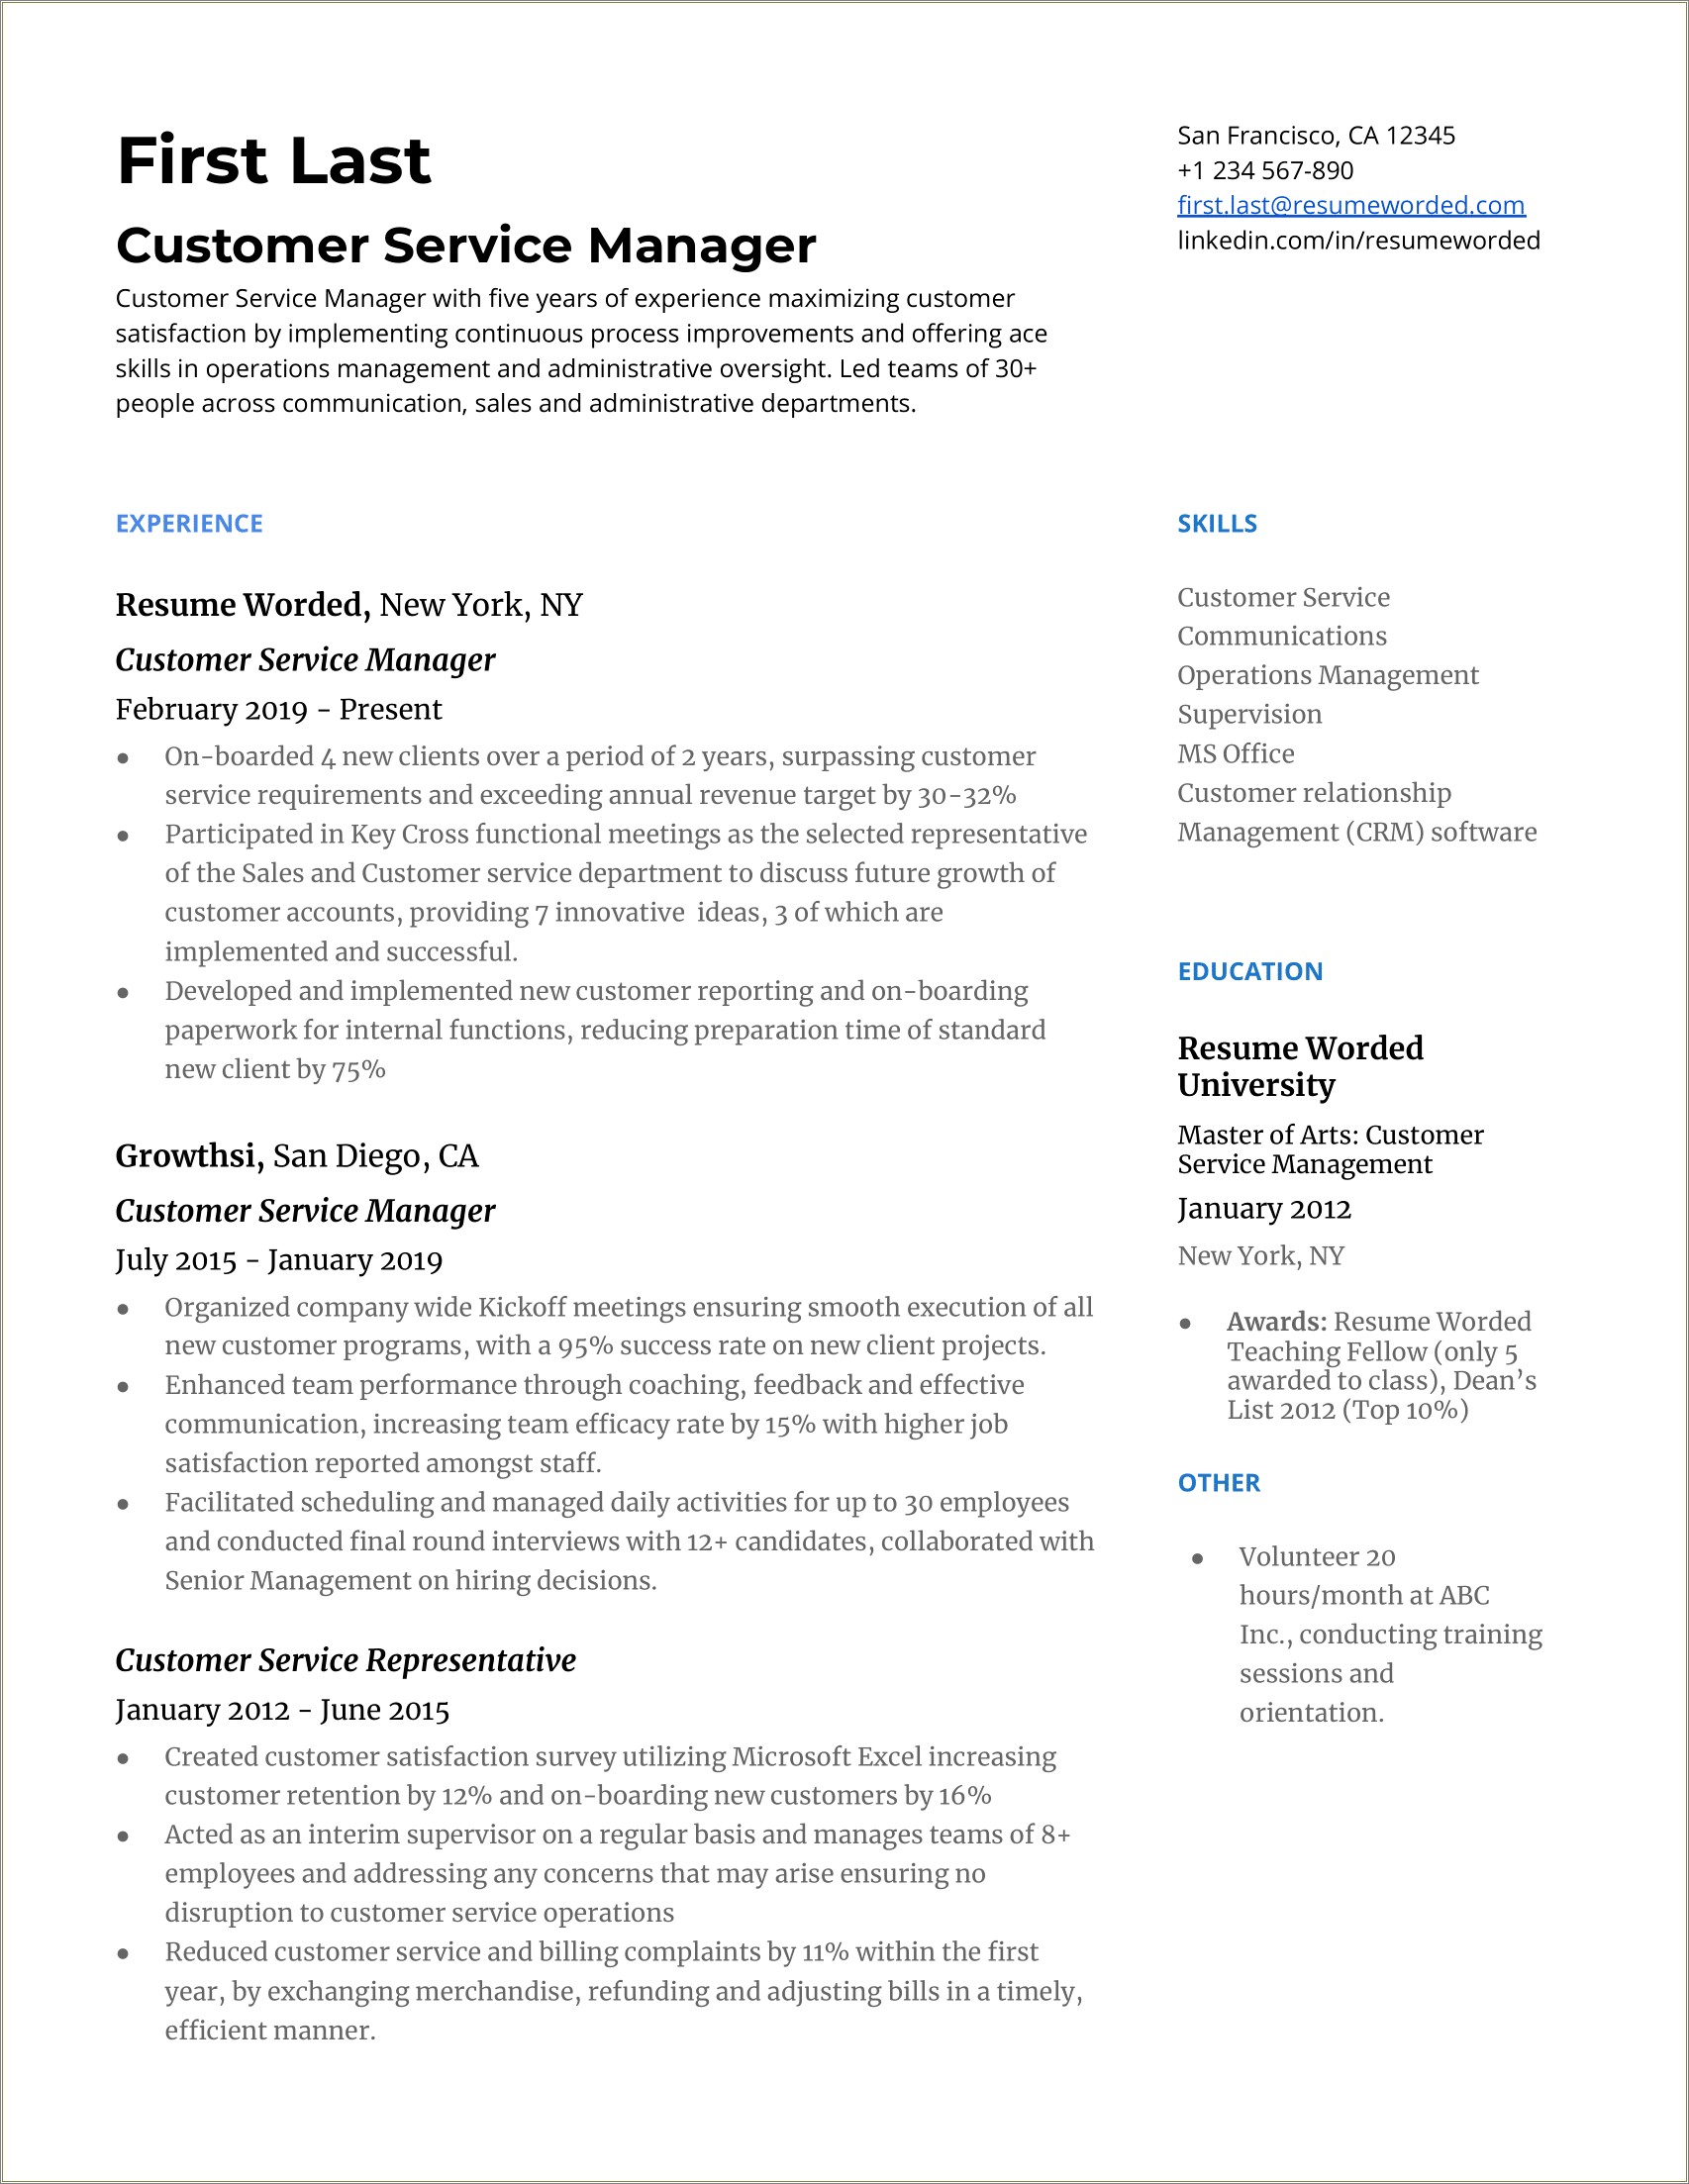 Experienced In Ms Office Resume Example